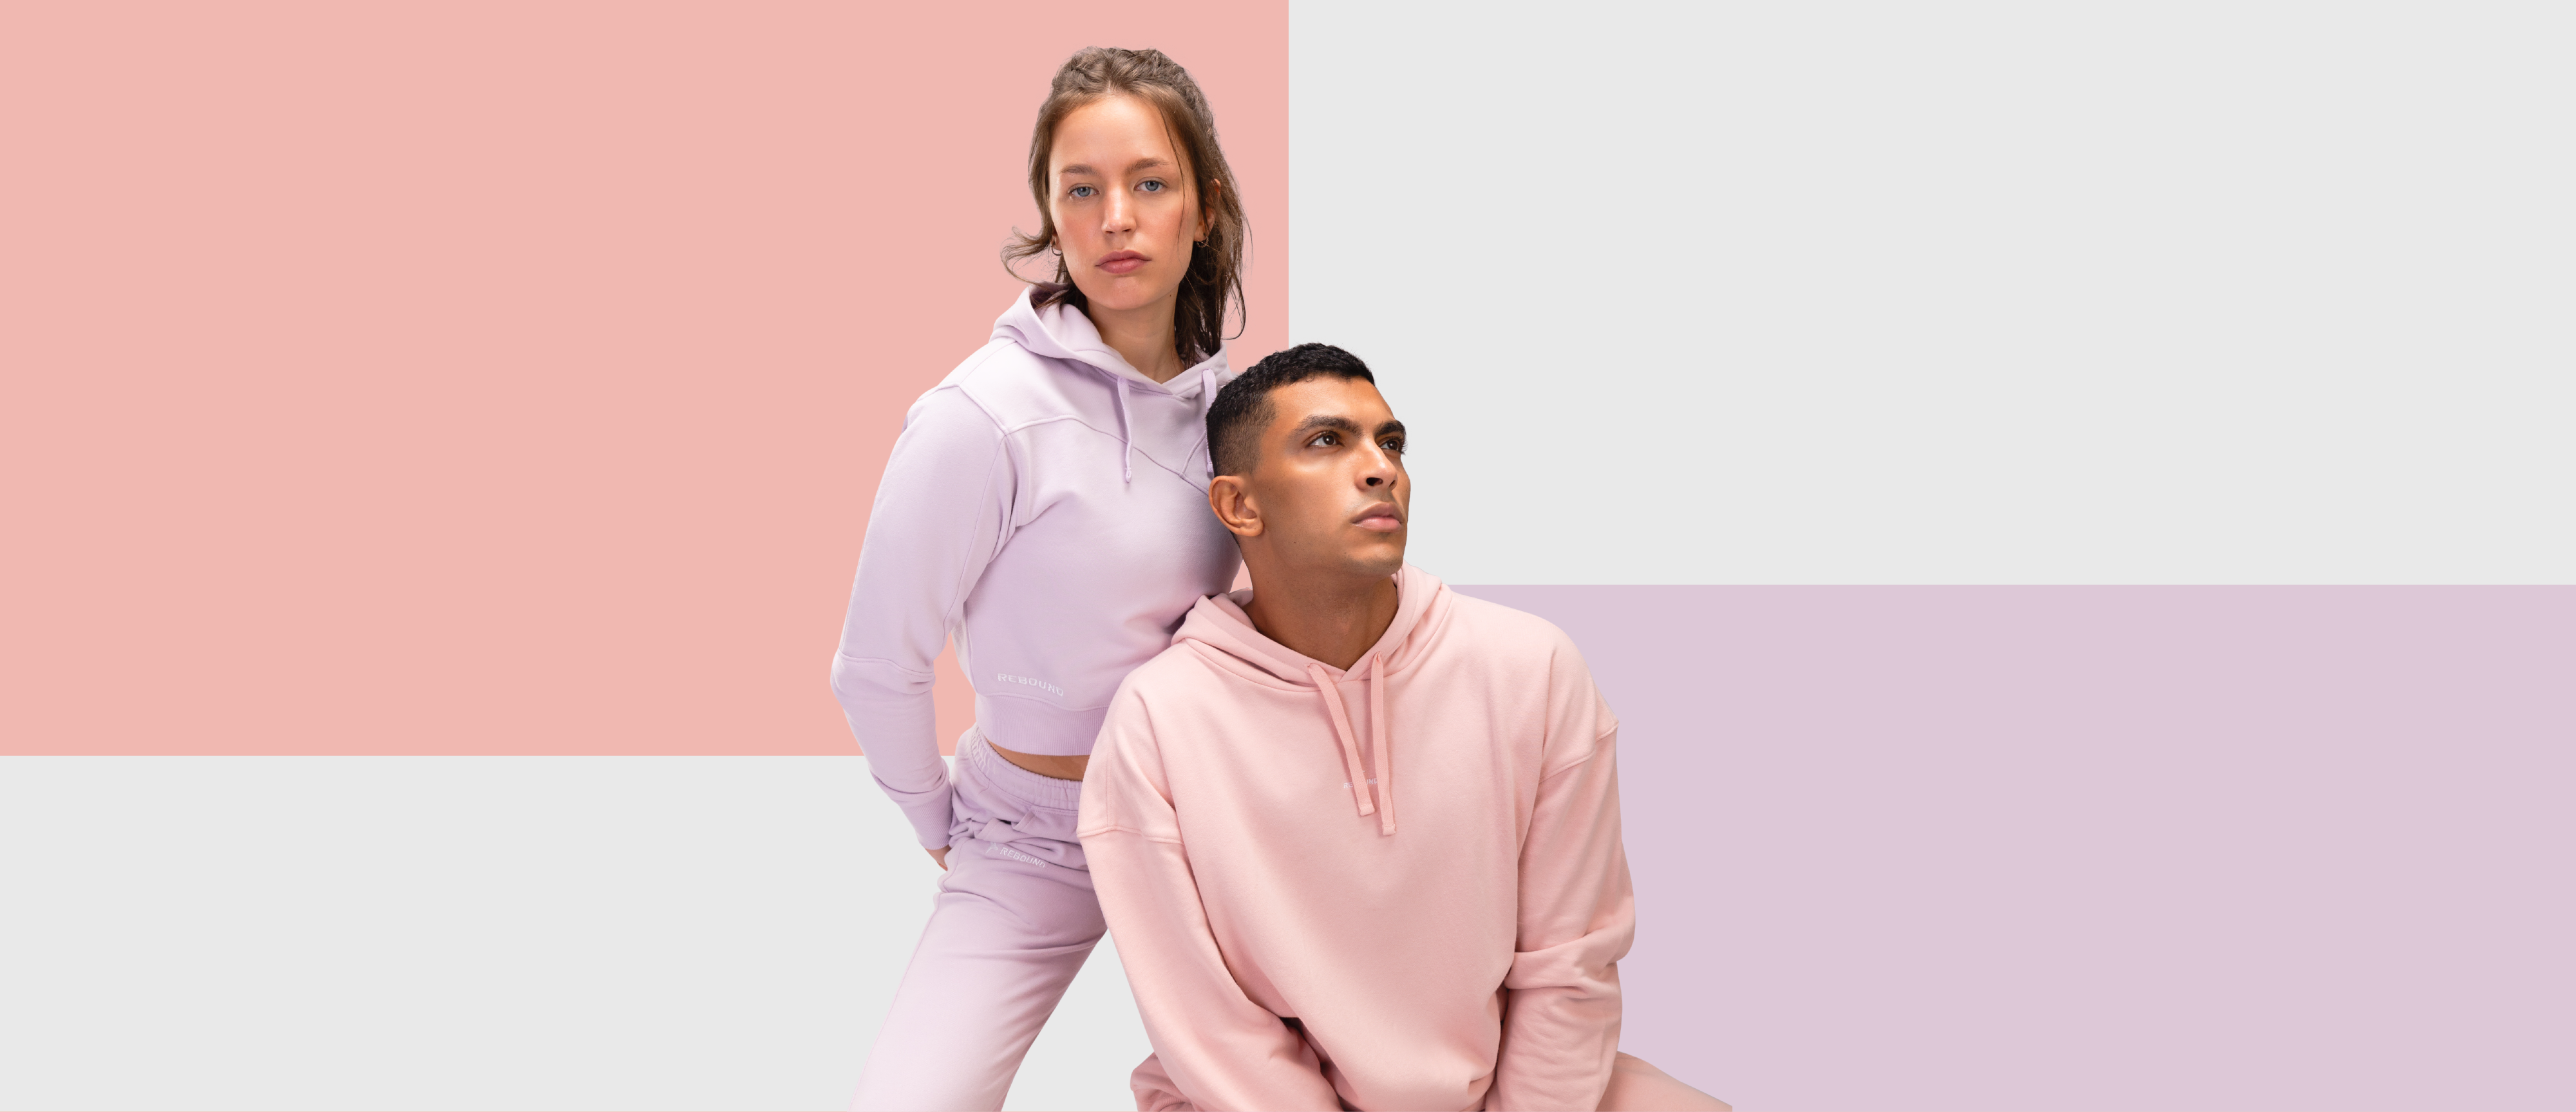 couple_look_banner.png